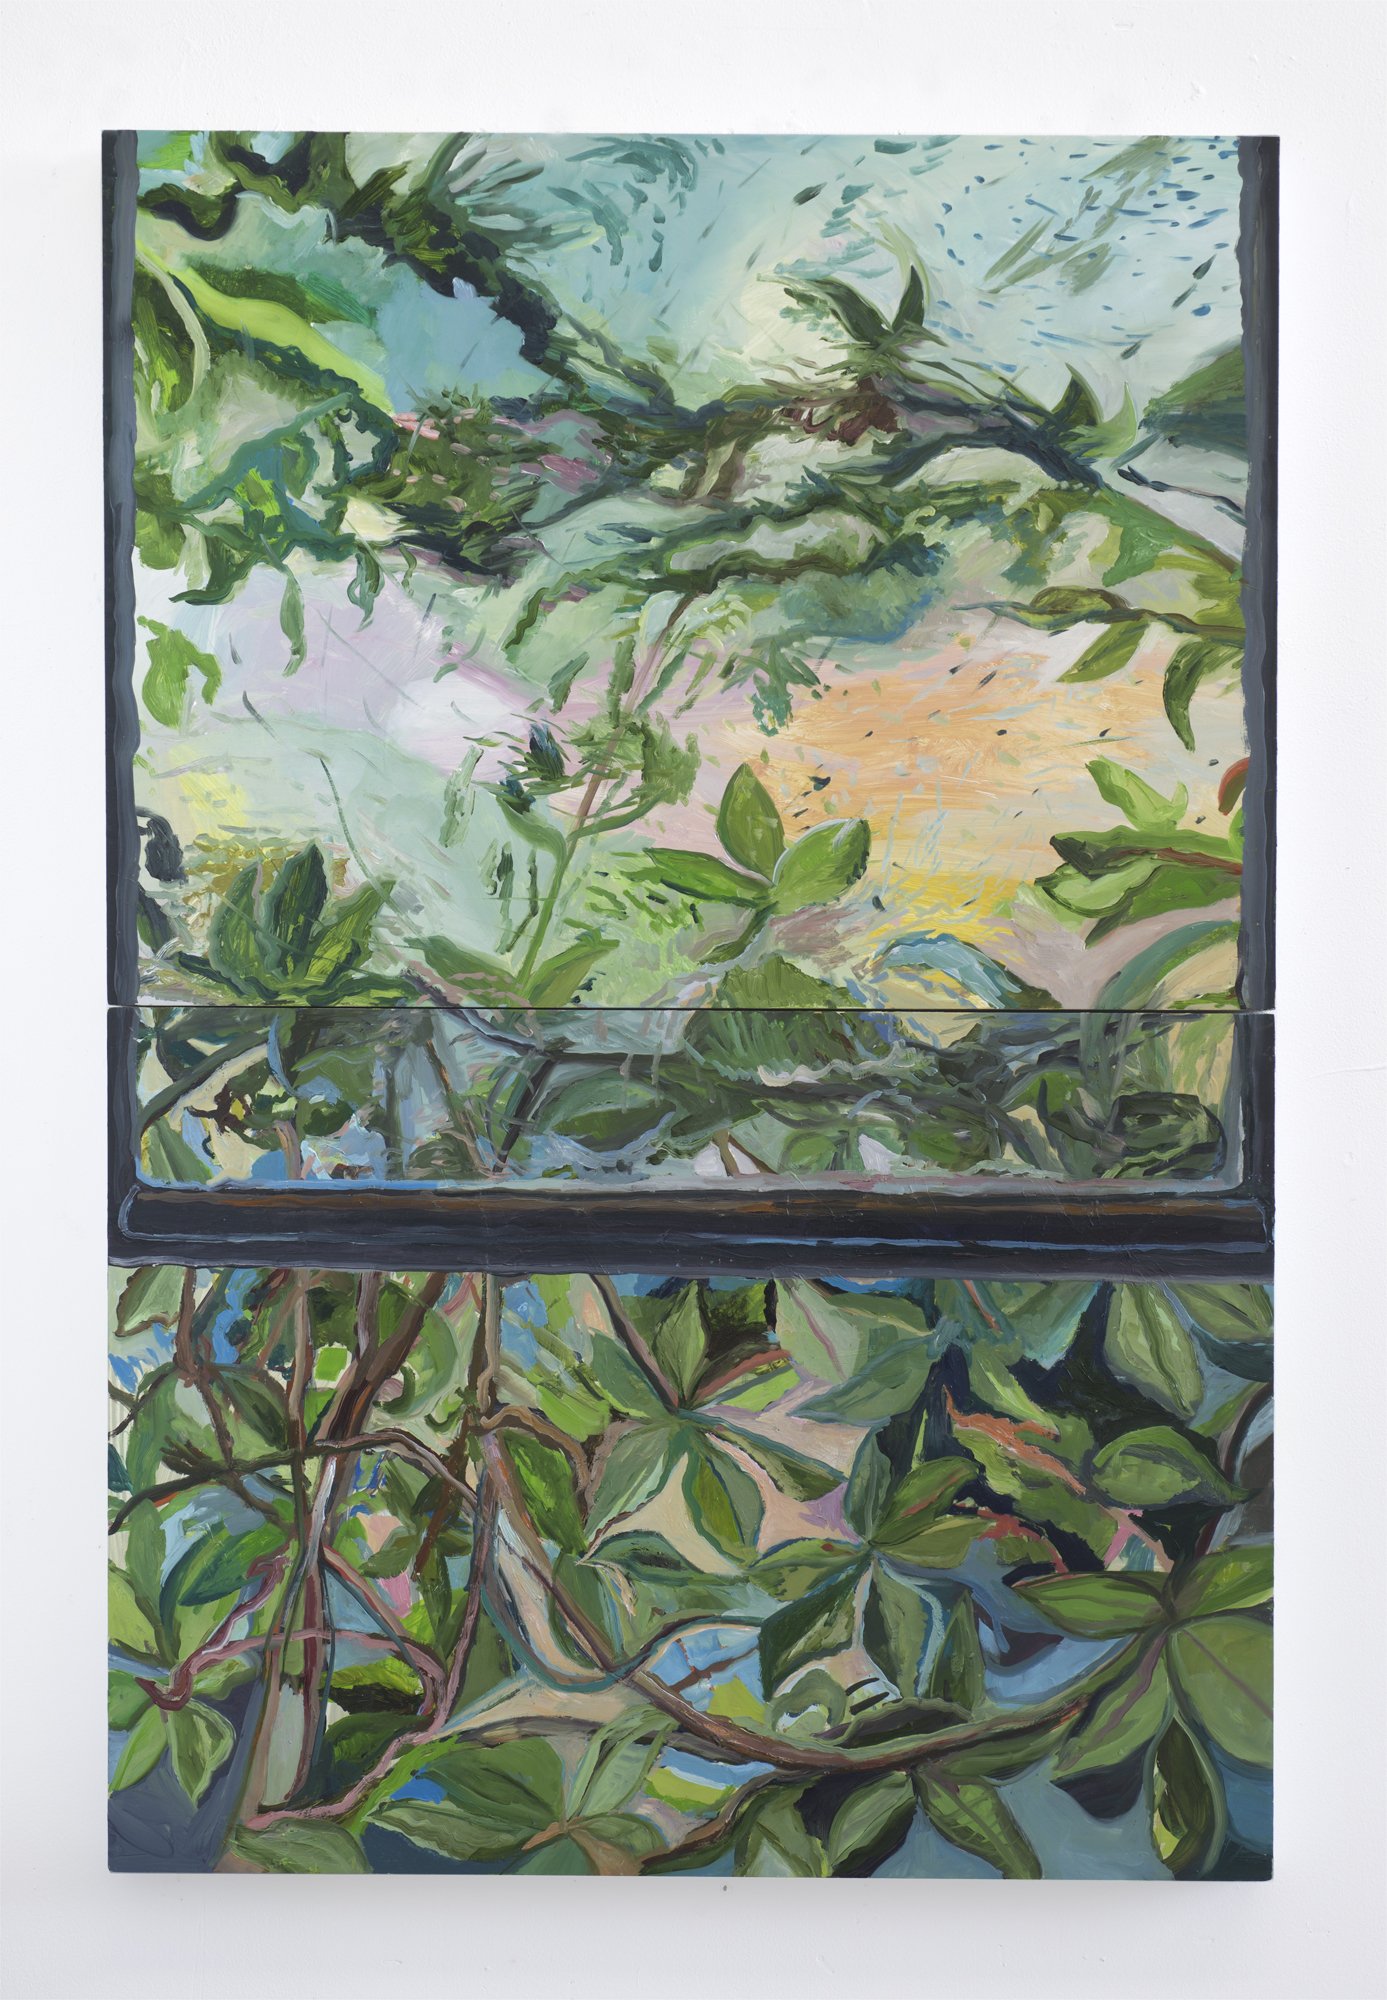 Ivy from the Open Window, 2019, oil on panel, 24 x 40 inches (diptych)